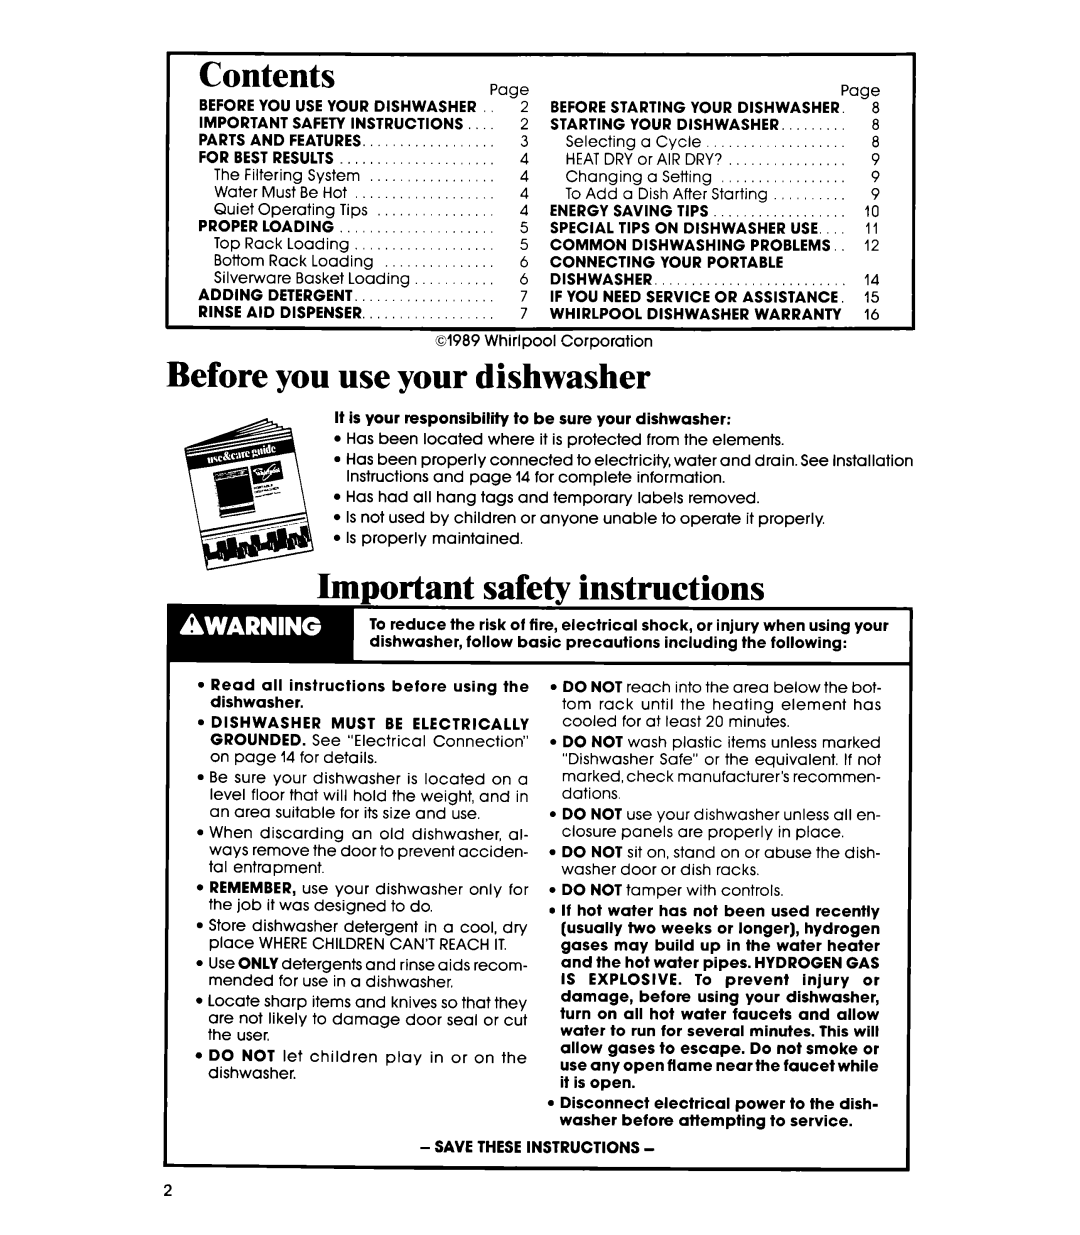 Whirlpool DP85QOXT manual Contents, Before you use your dishwasher, ImDortant safe& instructions 